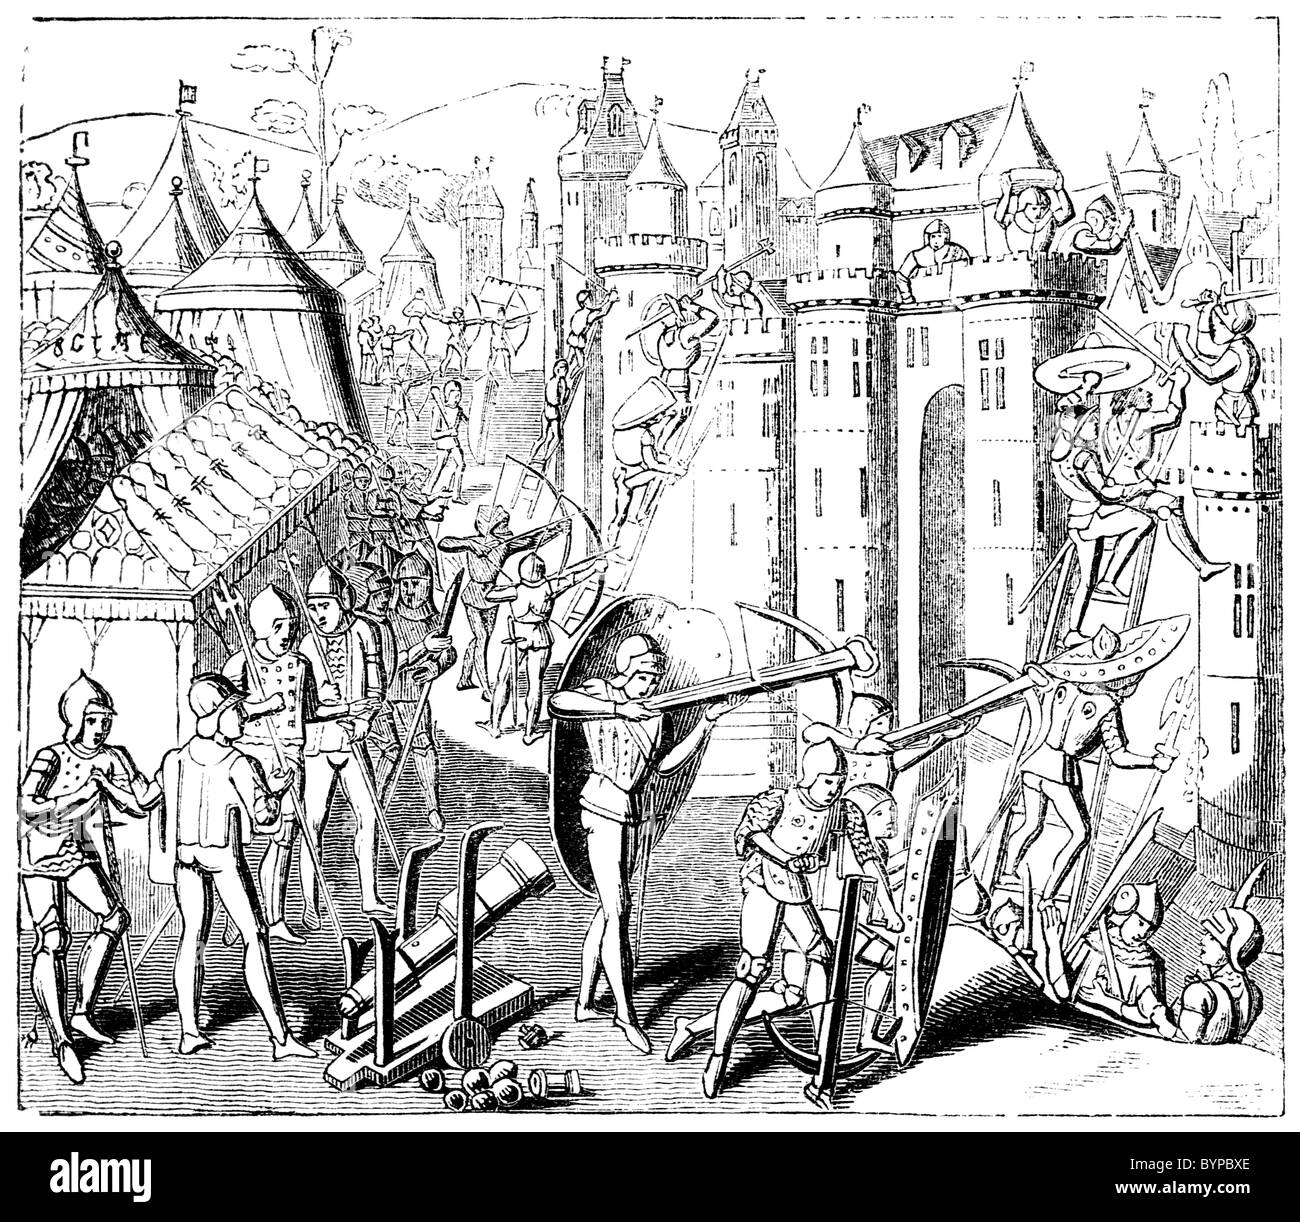 Medieval-style illustration, Storming a Fort Stock Photo